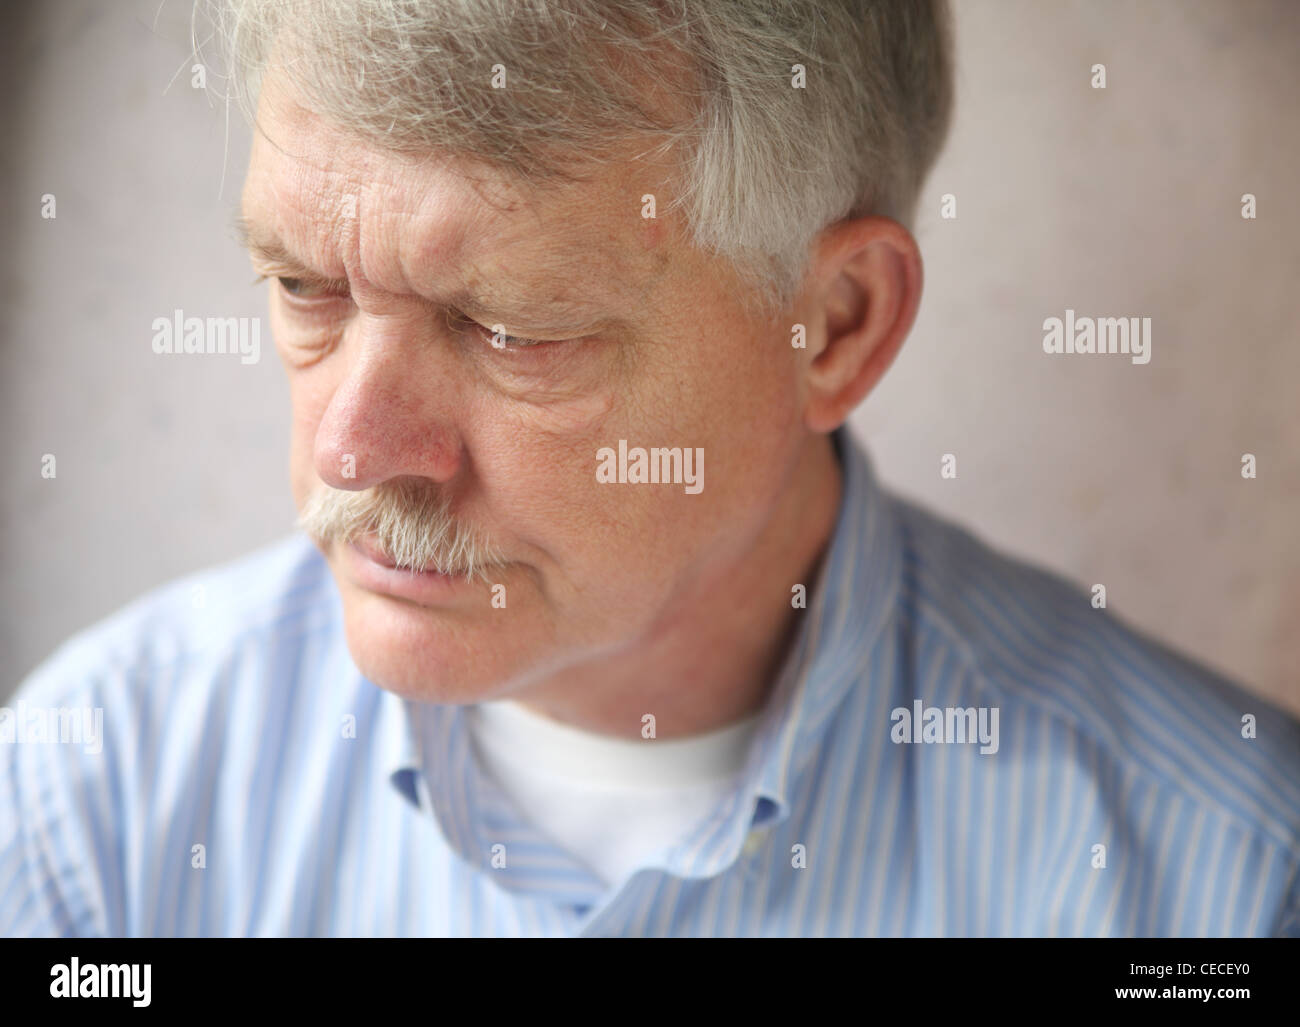 senior man with an angry, troubled expression Stock Photo